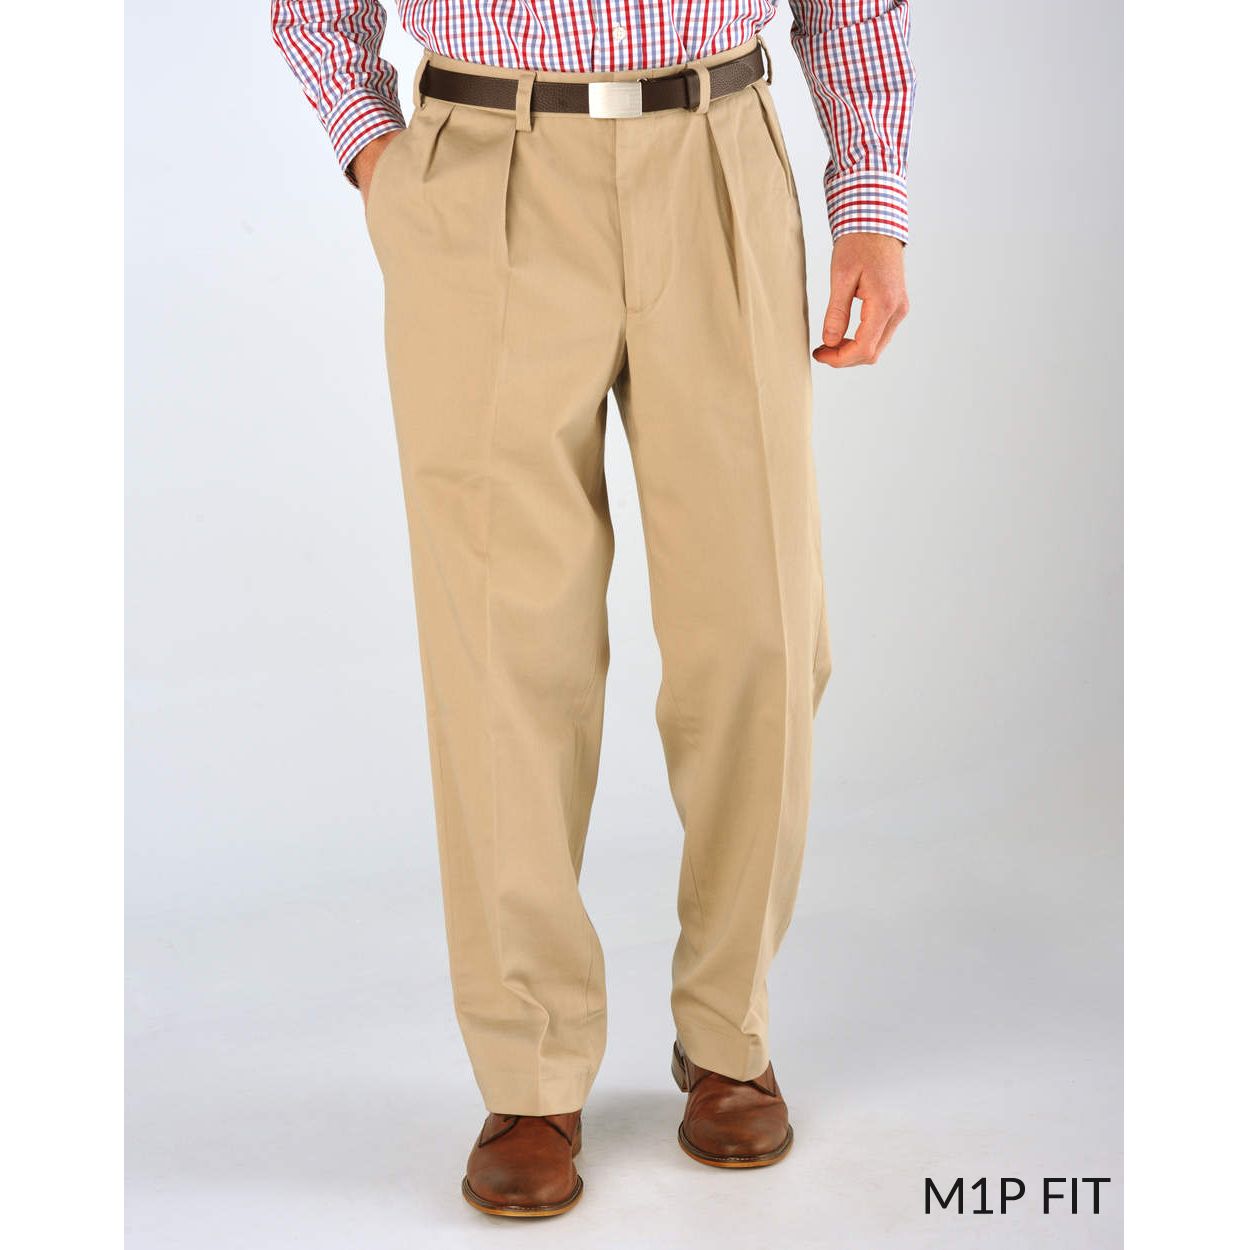 M1P Pleated Relaxed Fit Original Twills in Khaki (Size 30 x 32) by Bills Khakis